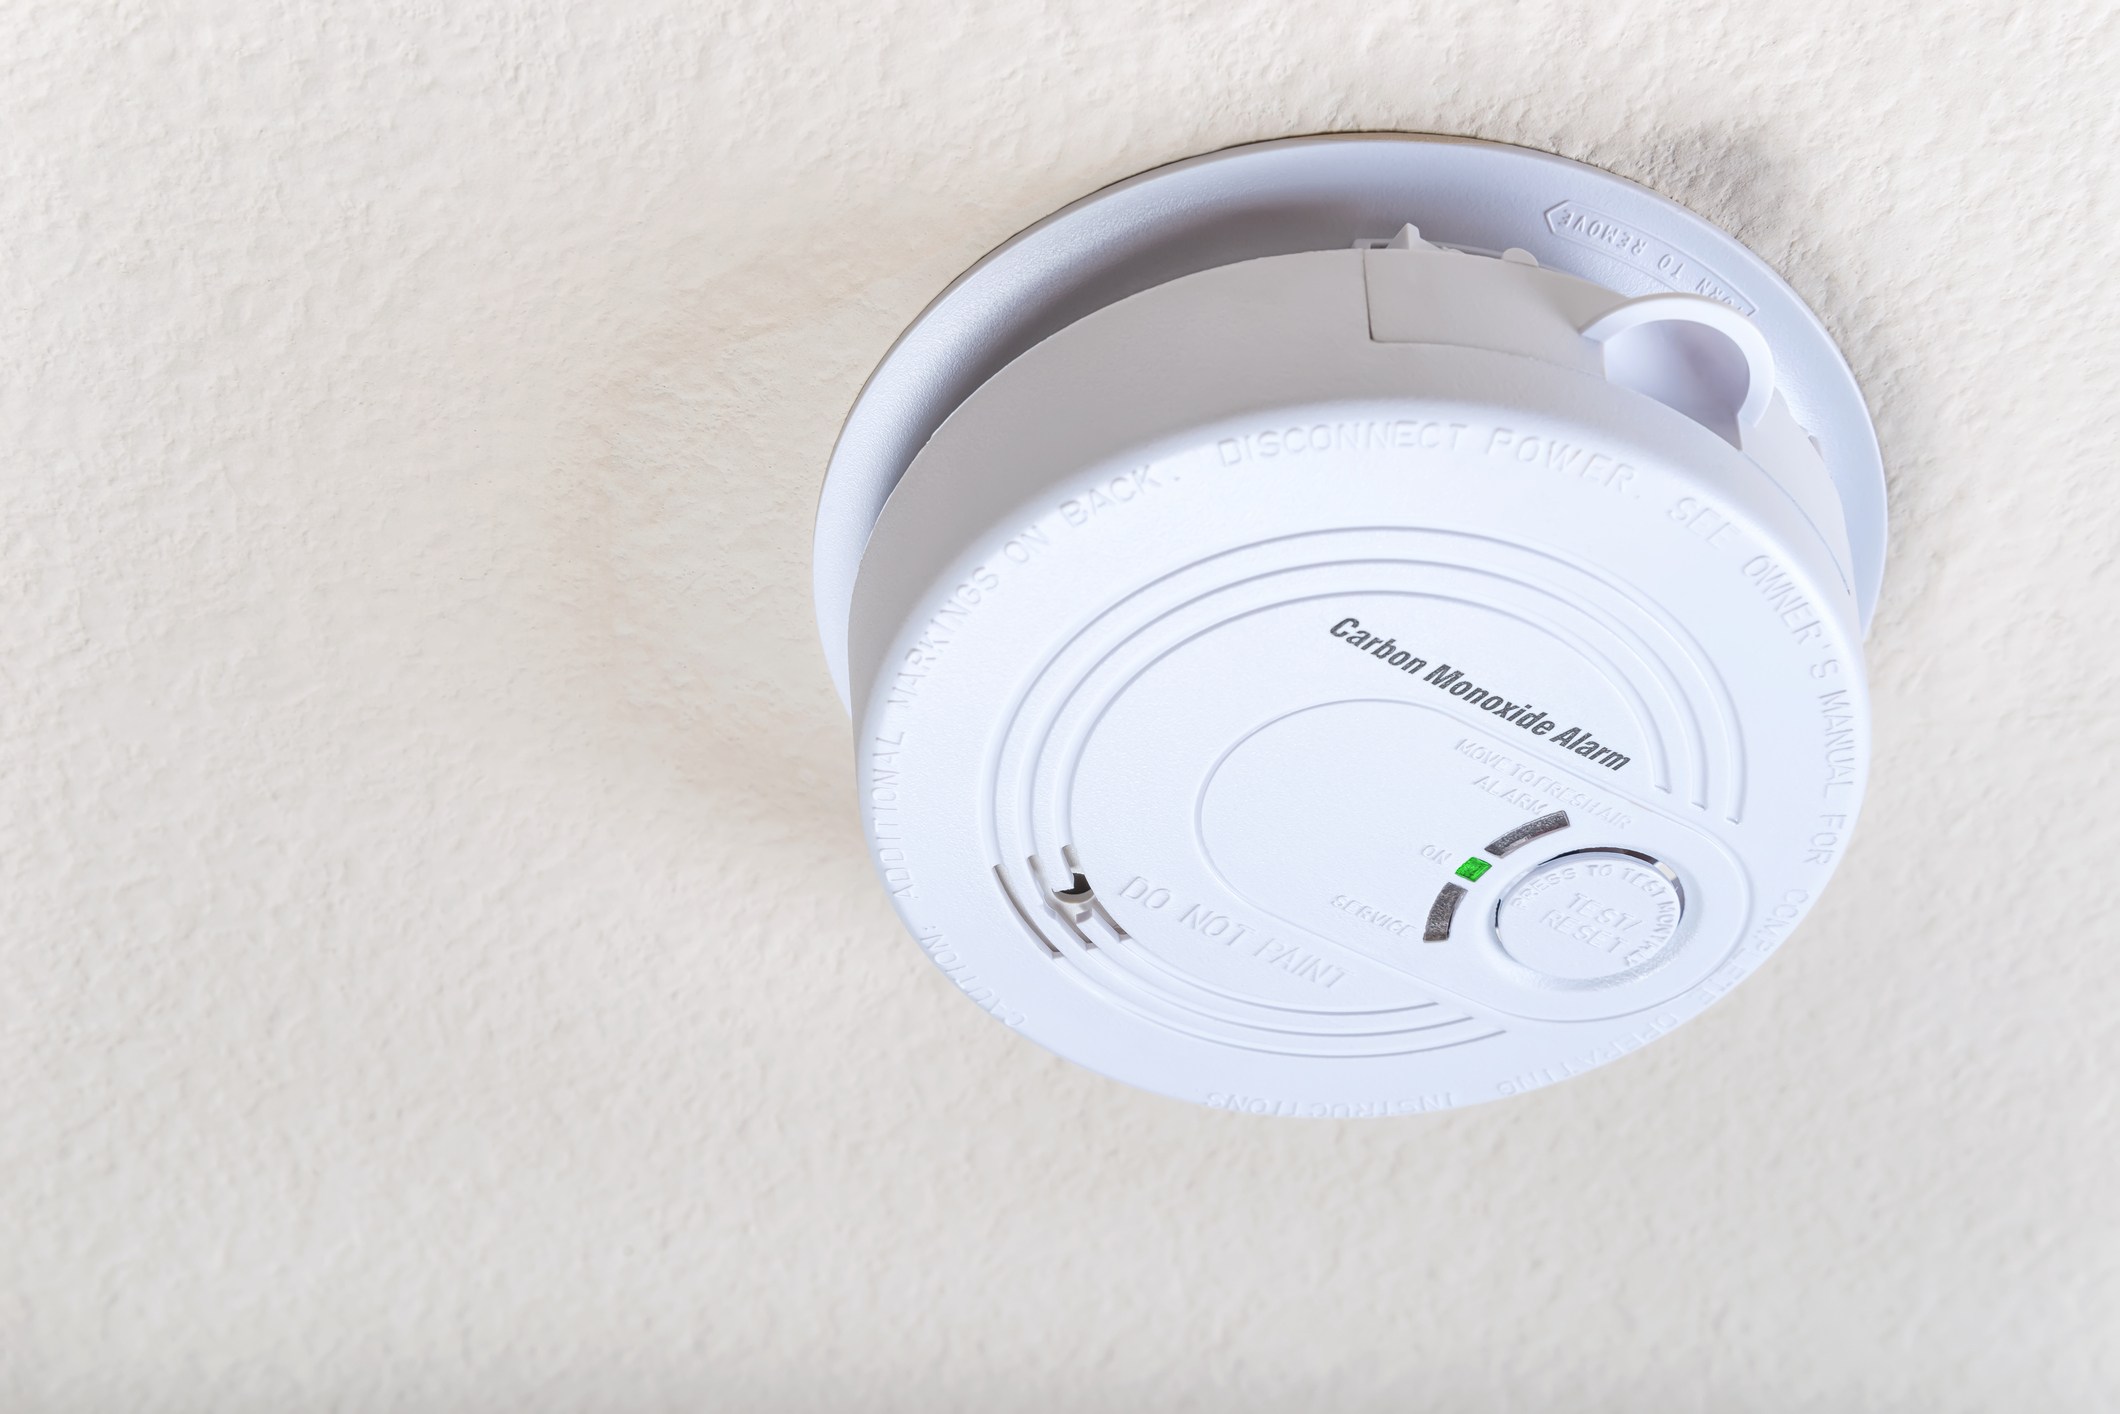 Carbon monoxide alarm mounted on the ceiling